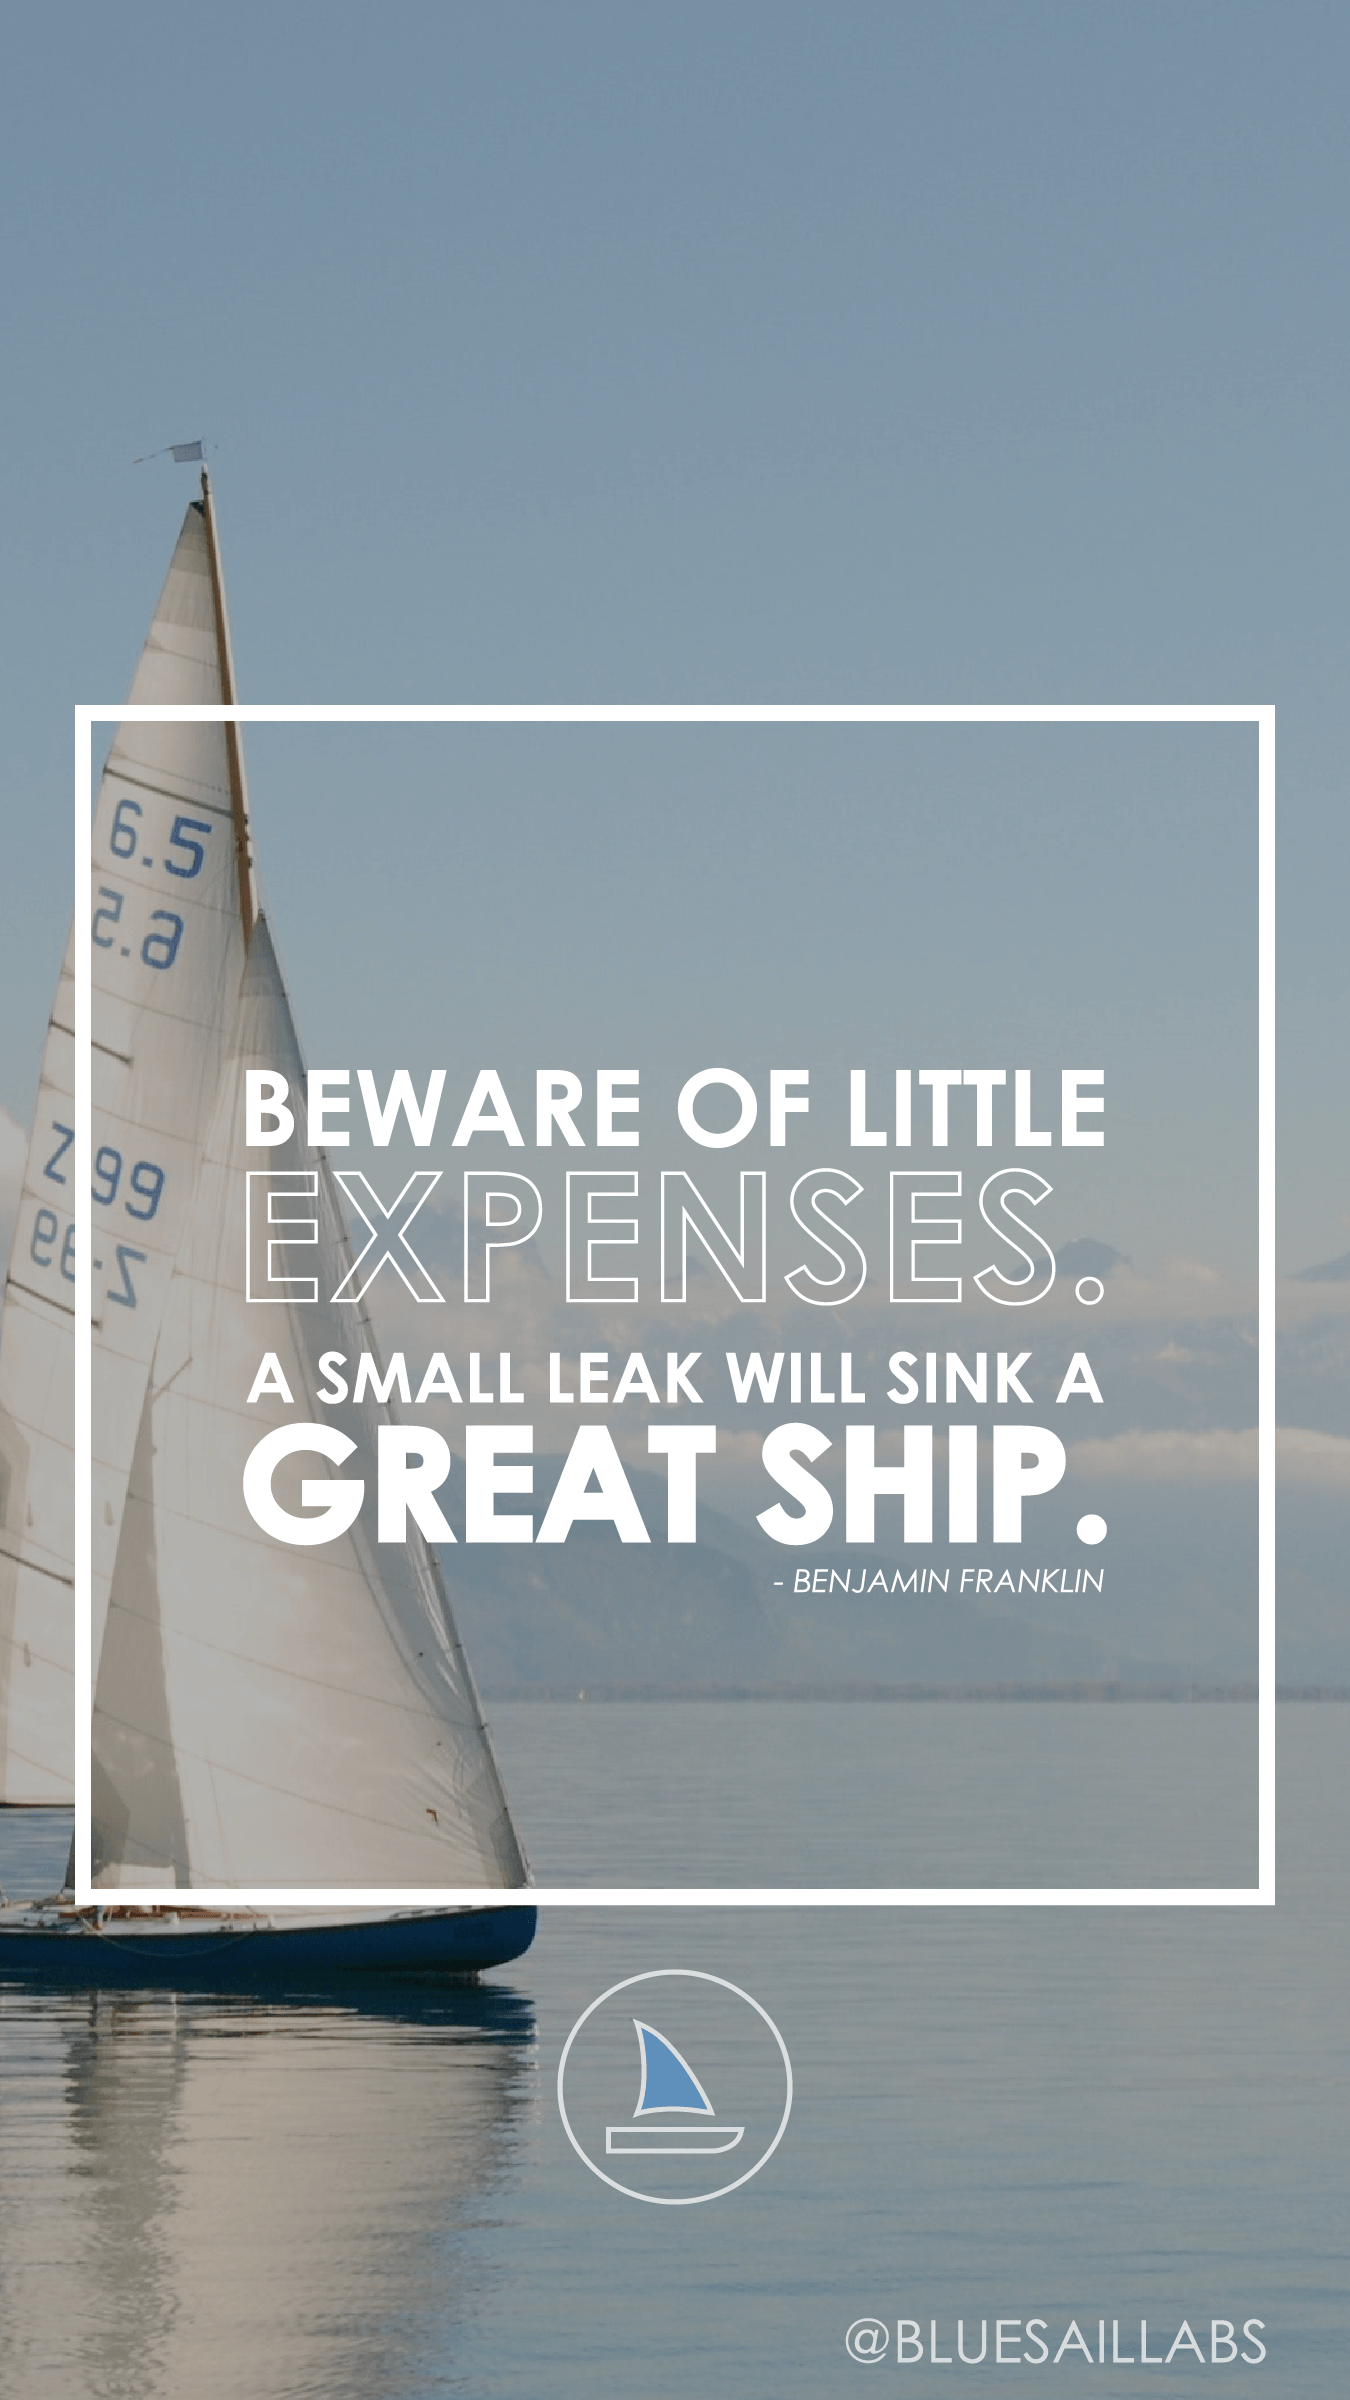 Beware of little expenses. A small leak will sink a great